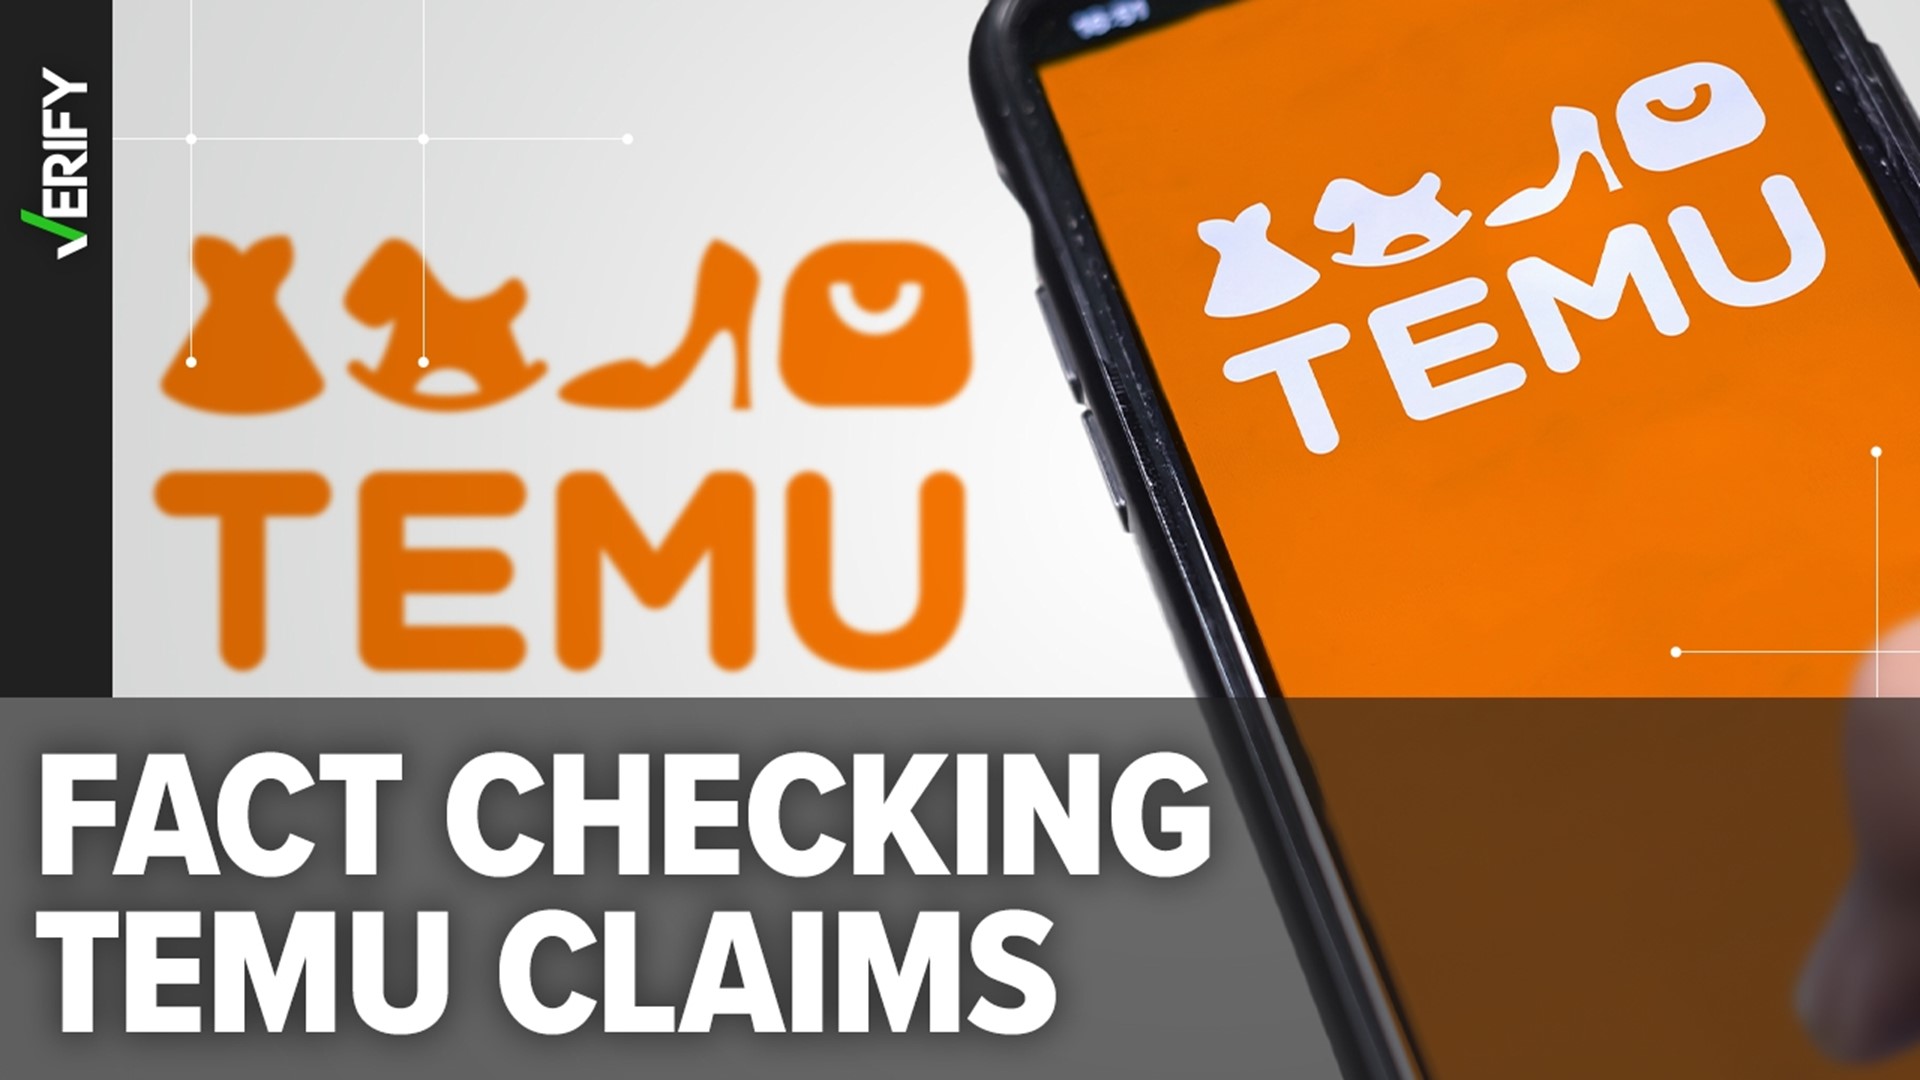 Temu is an online store advertising cheap deals. People online wonder if it’s a scam, if the cheap prices are legit. Here’s what we can VERIFY.